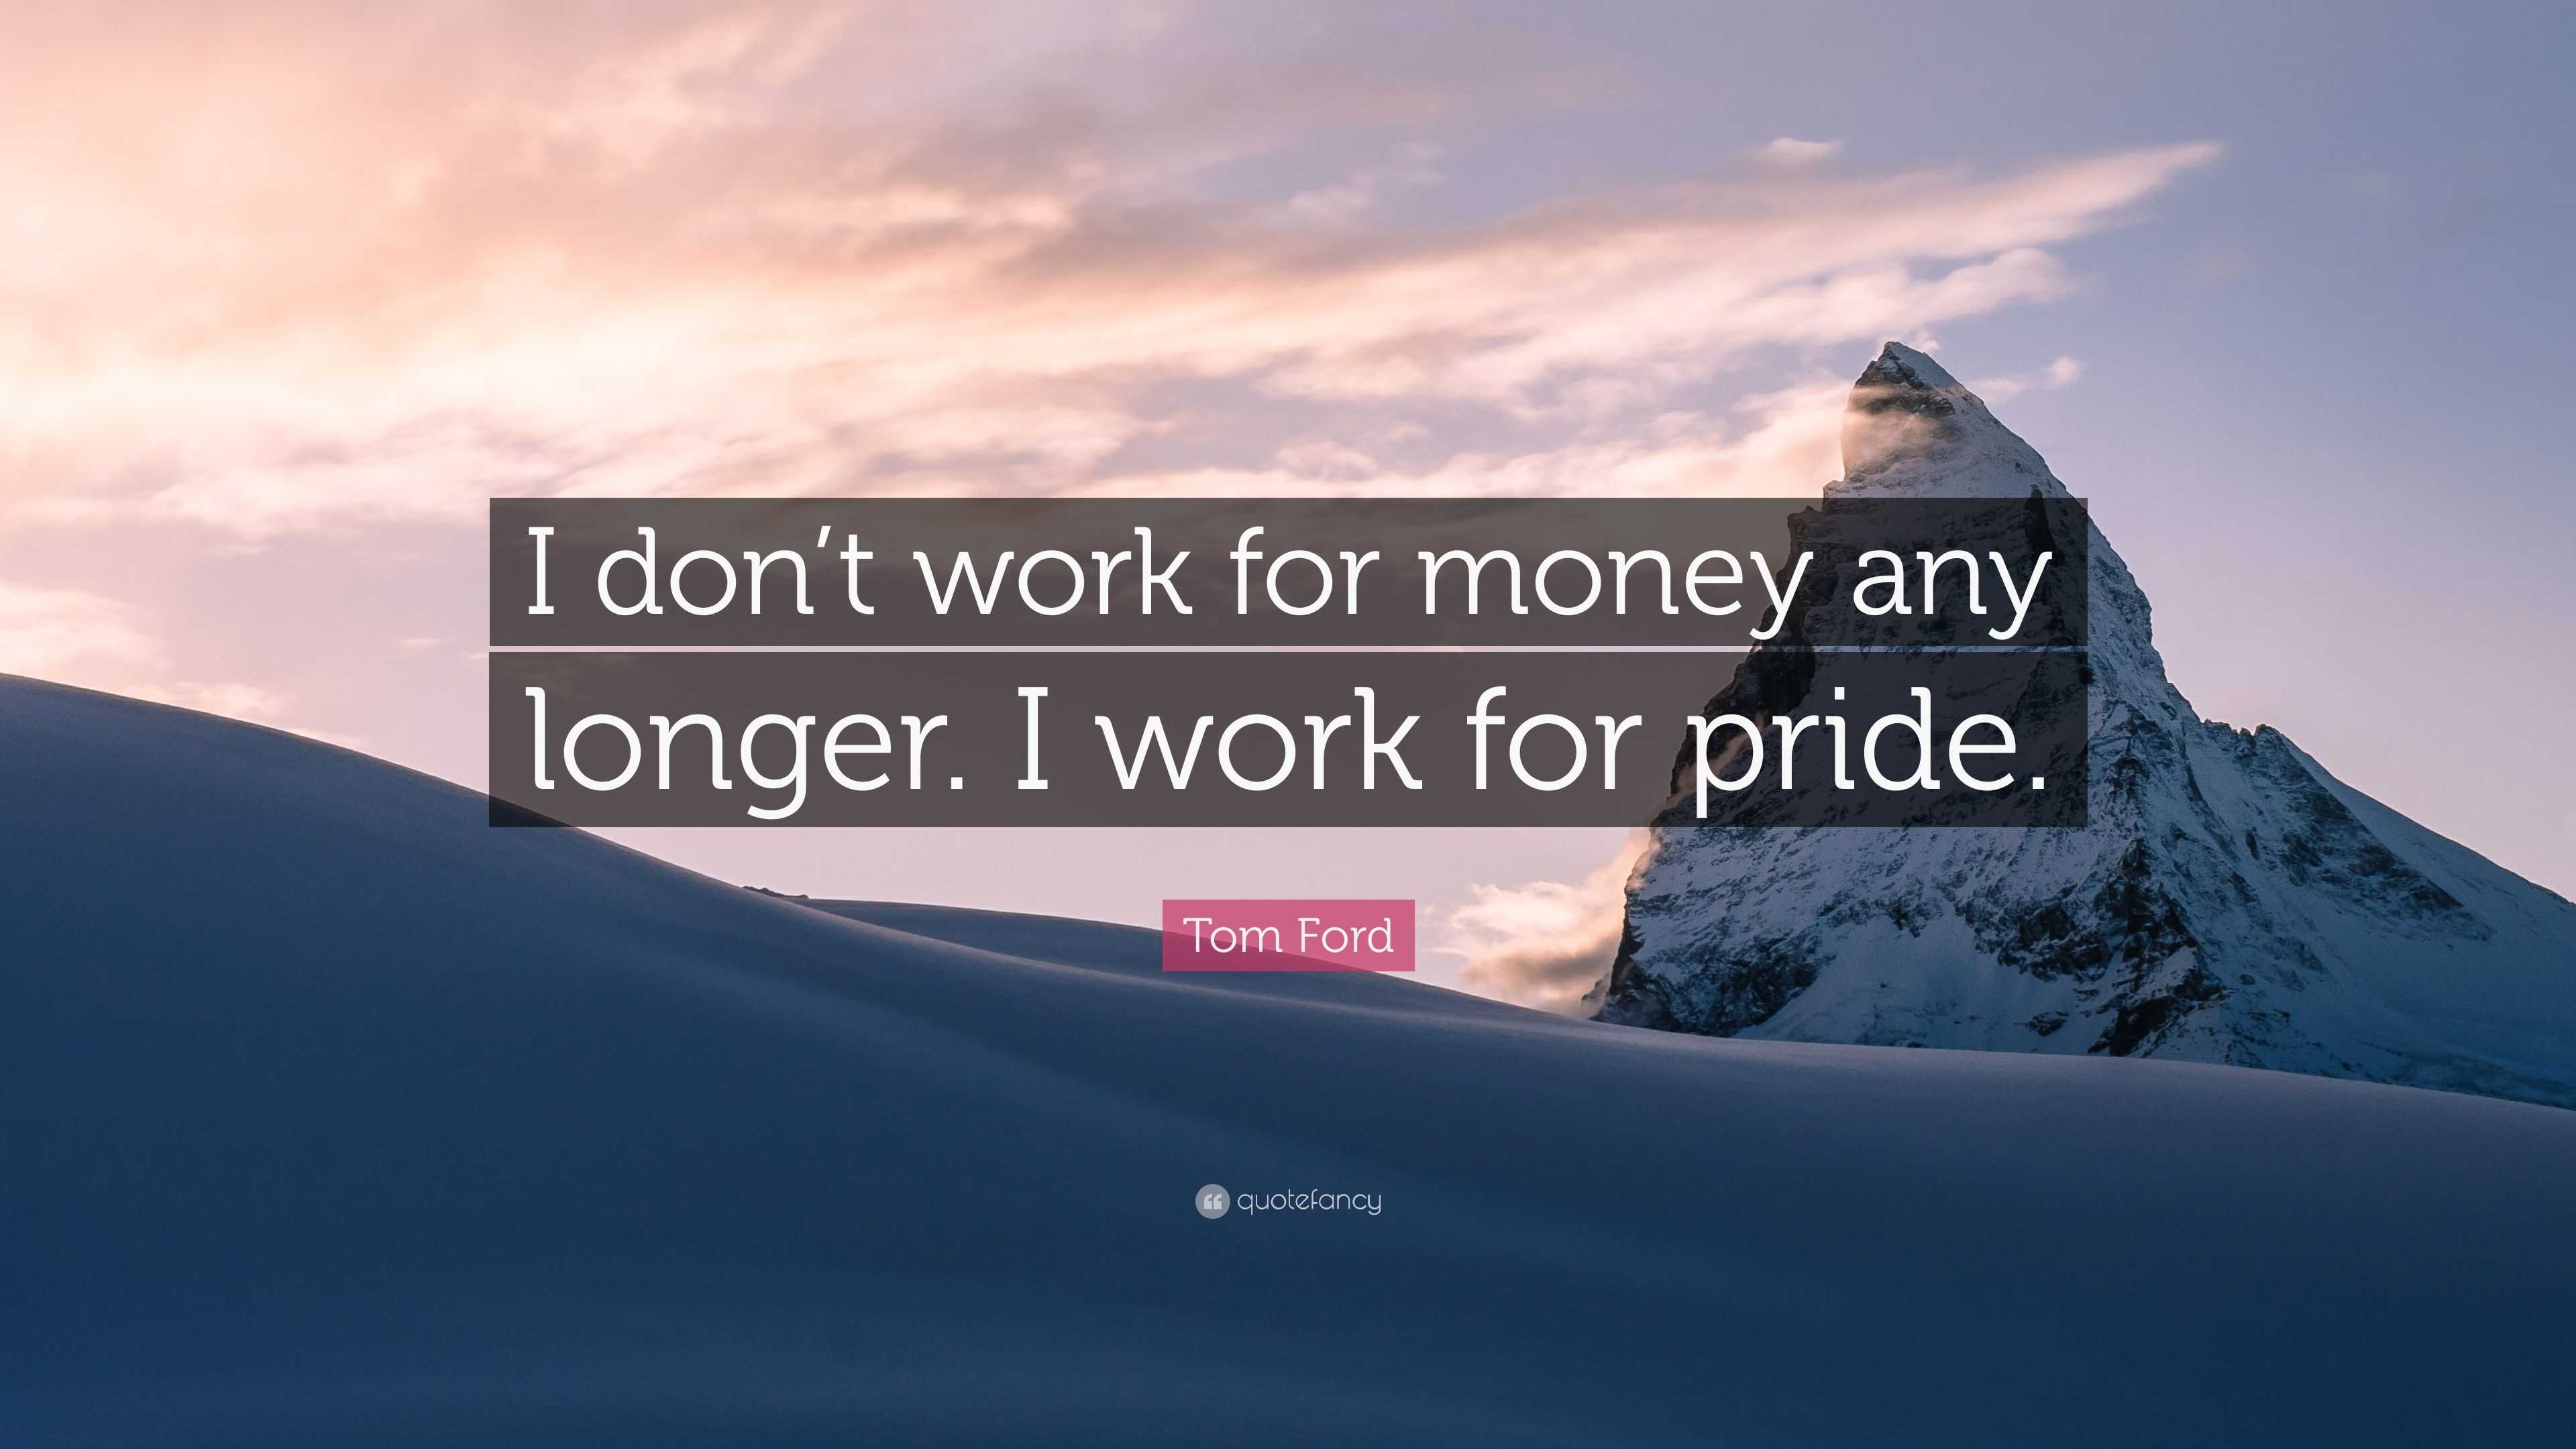 Tom Ford Quote: “I don't work for money any longer. I work for pride.”